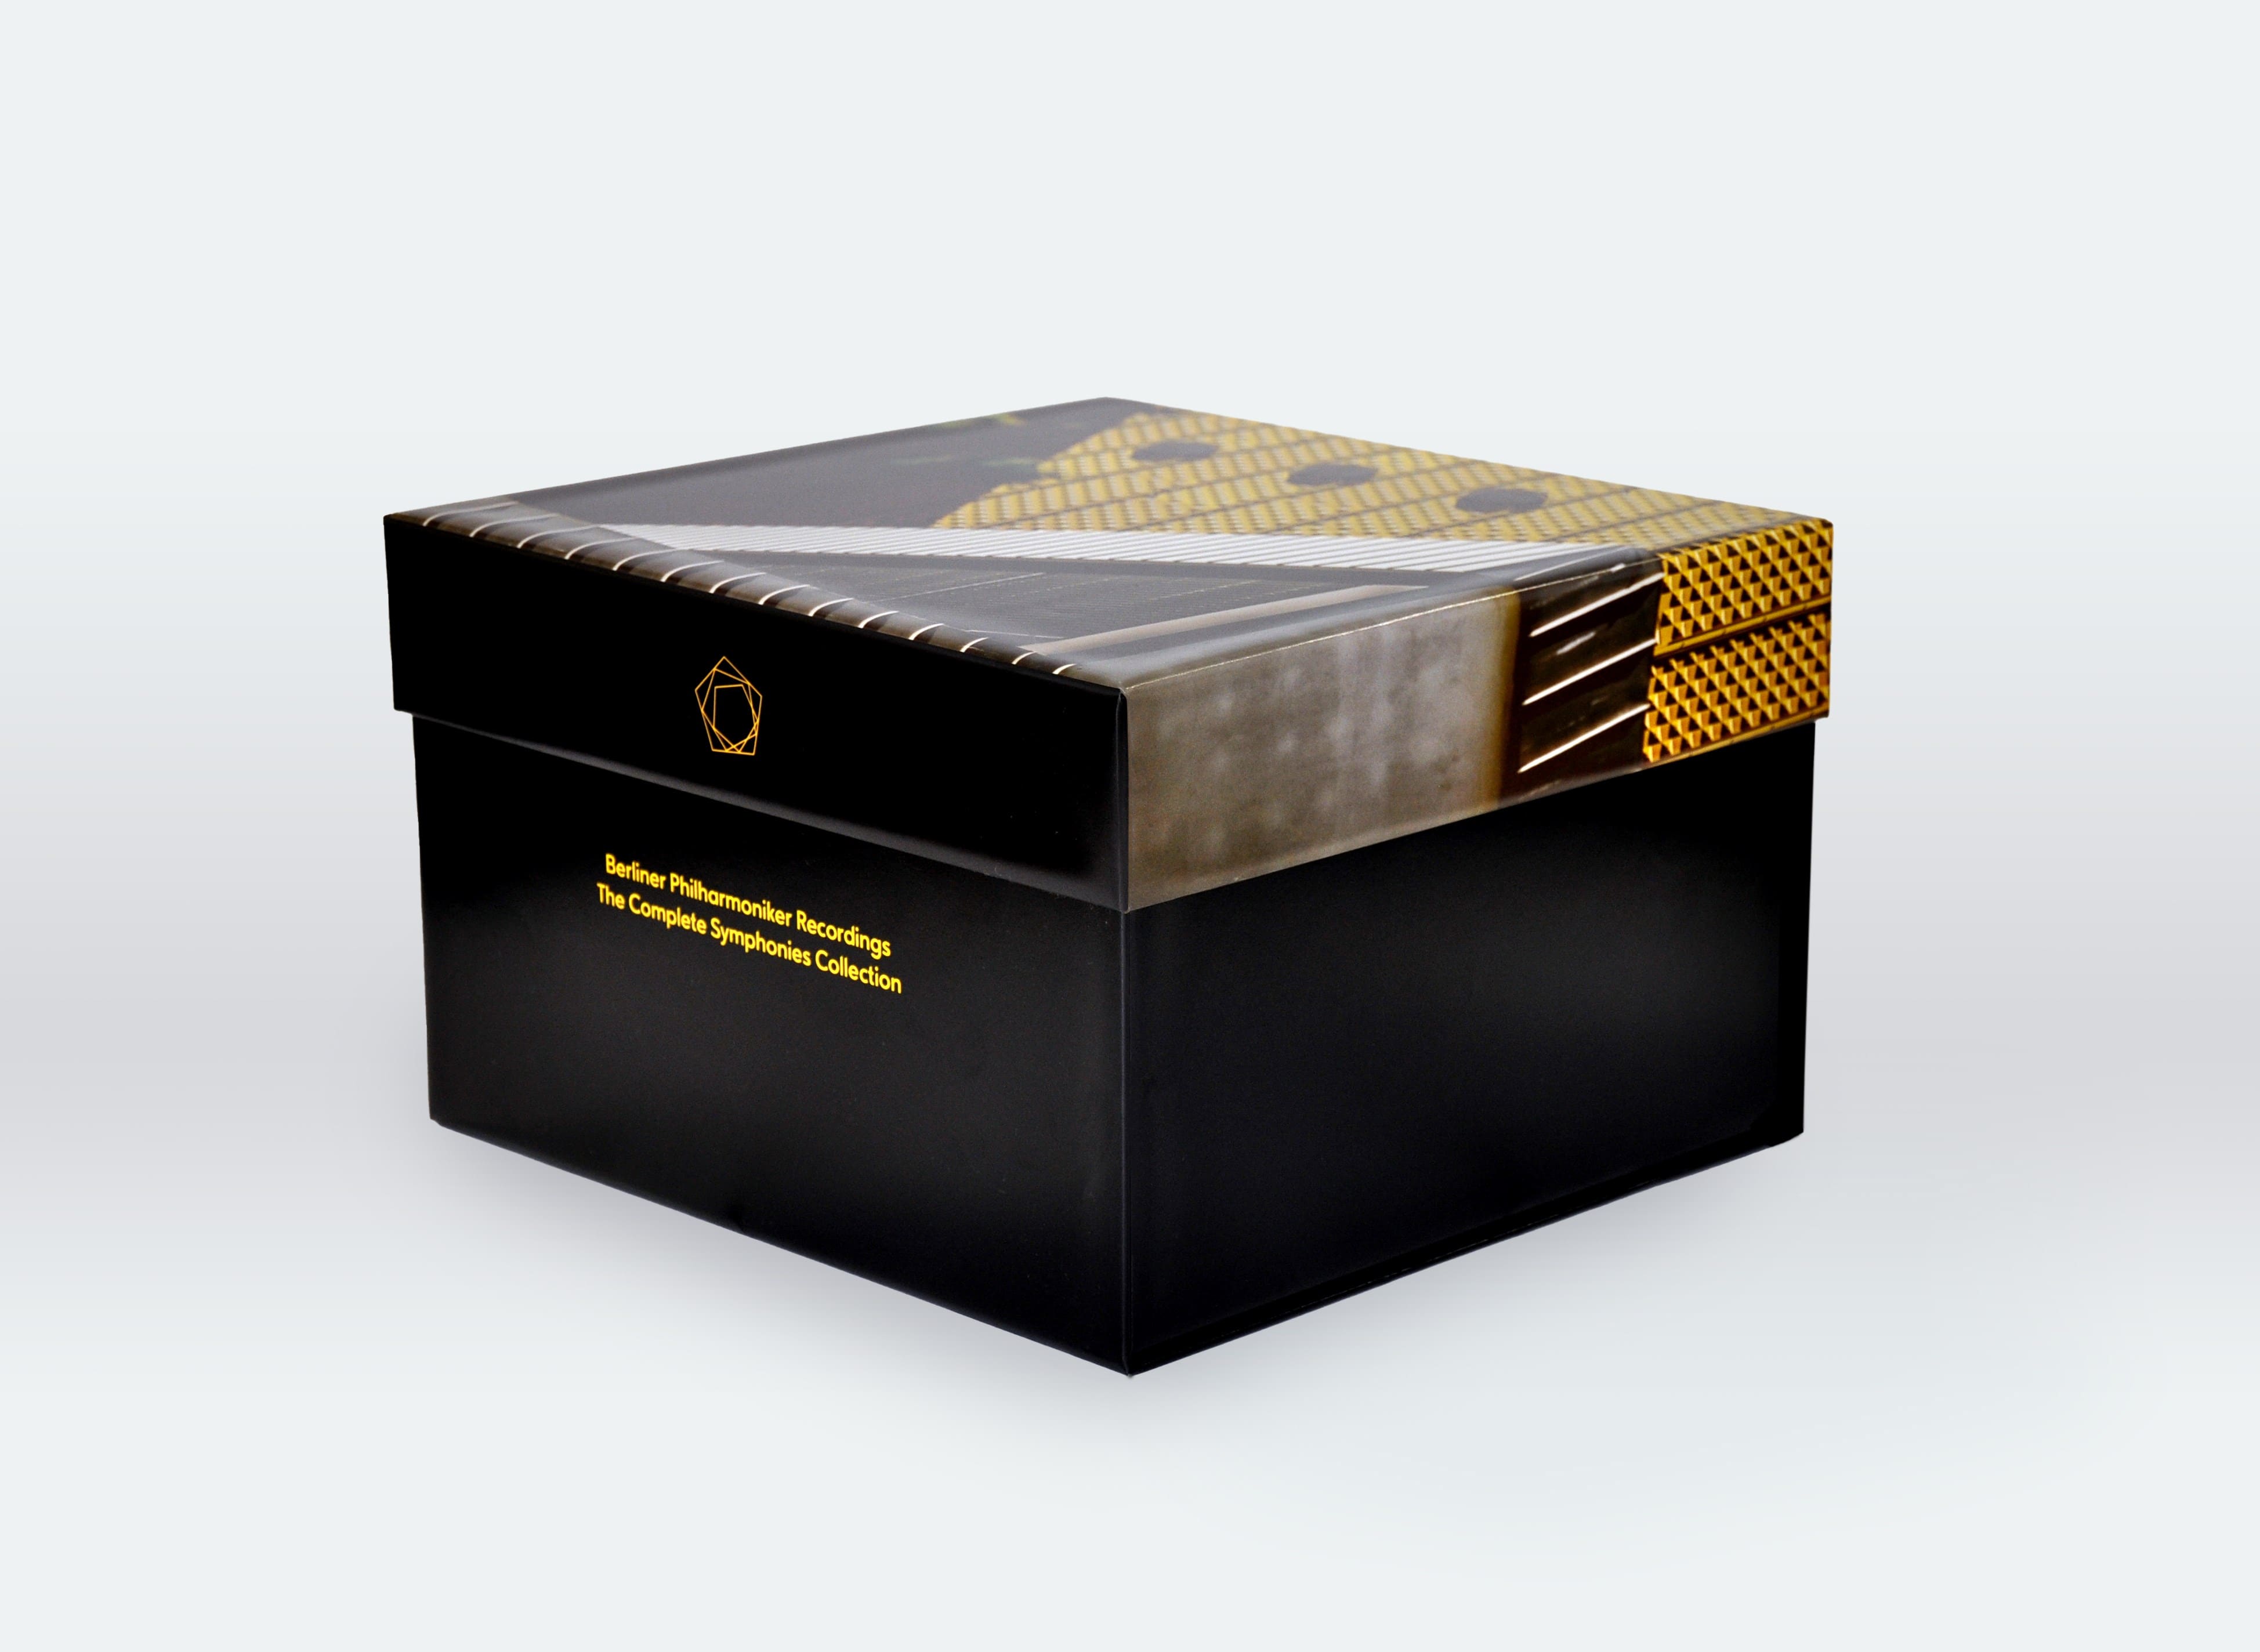 xEtBER[fBOX ȑSW (Berliner Philharmoniker Recordings / The Complete Symphonies Collection) [38CD+15Blu-ray] [Import] [{сEt]